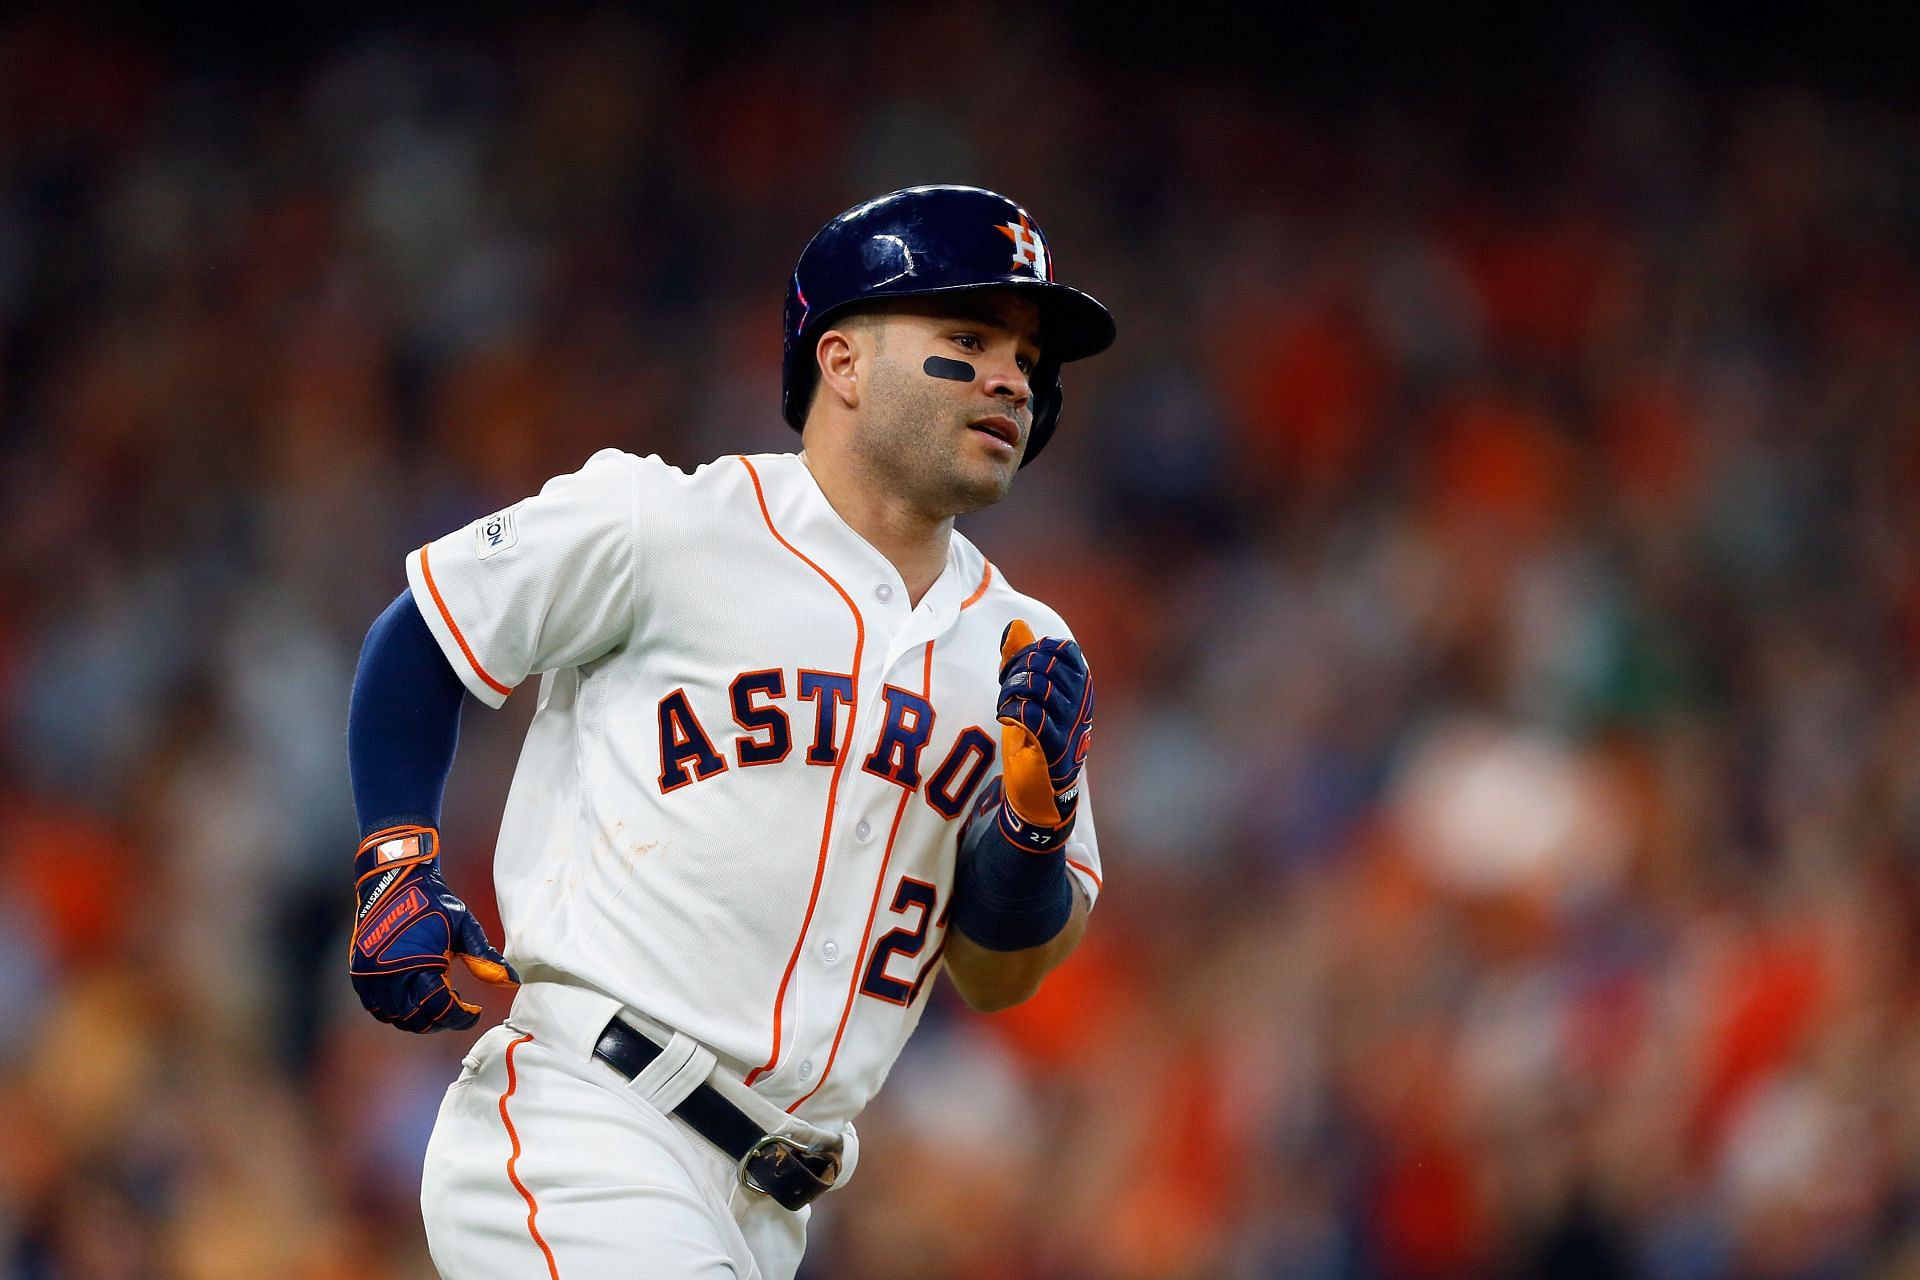 Divisional Round - Boston Red Sox v Houston Astros - Game One: HOUSTON, TX - OCTOBER 05: Jose Altuve #27 of the Houston Astros runs the bases after hitting a home run in the seventh inning against the Boston Red Sox during game one of the American League Division Series at Minute Maid Park on October 5, 2017, in Houston, Texas. (Photo by Bob Levey/Getty Images)